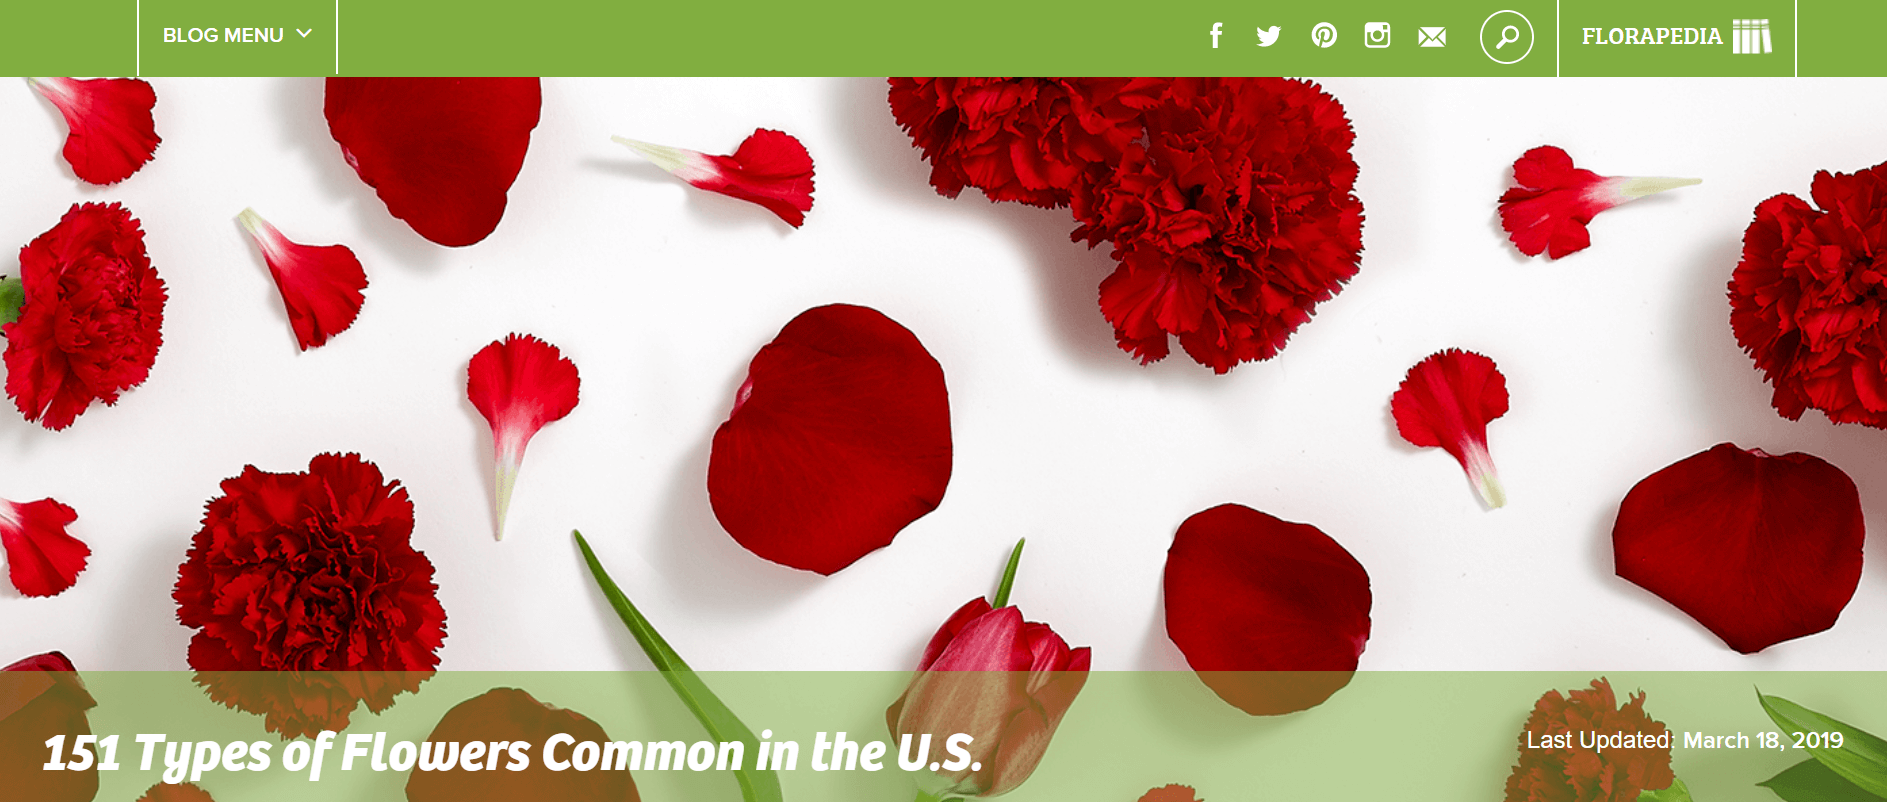 proflowers ecommerce content marketing examples